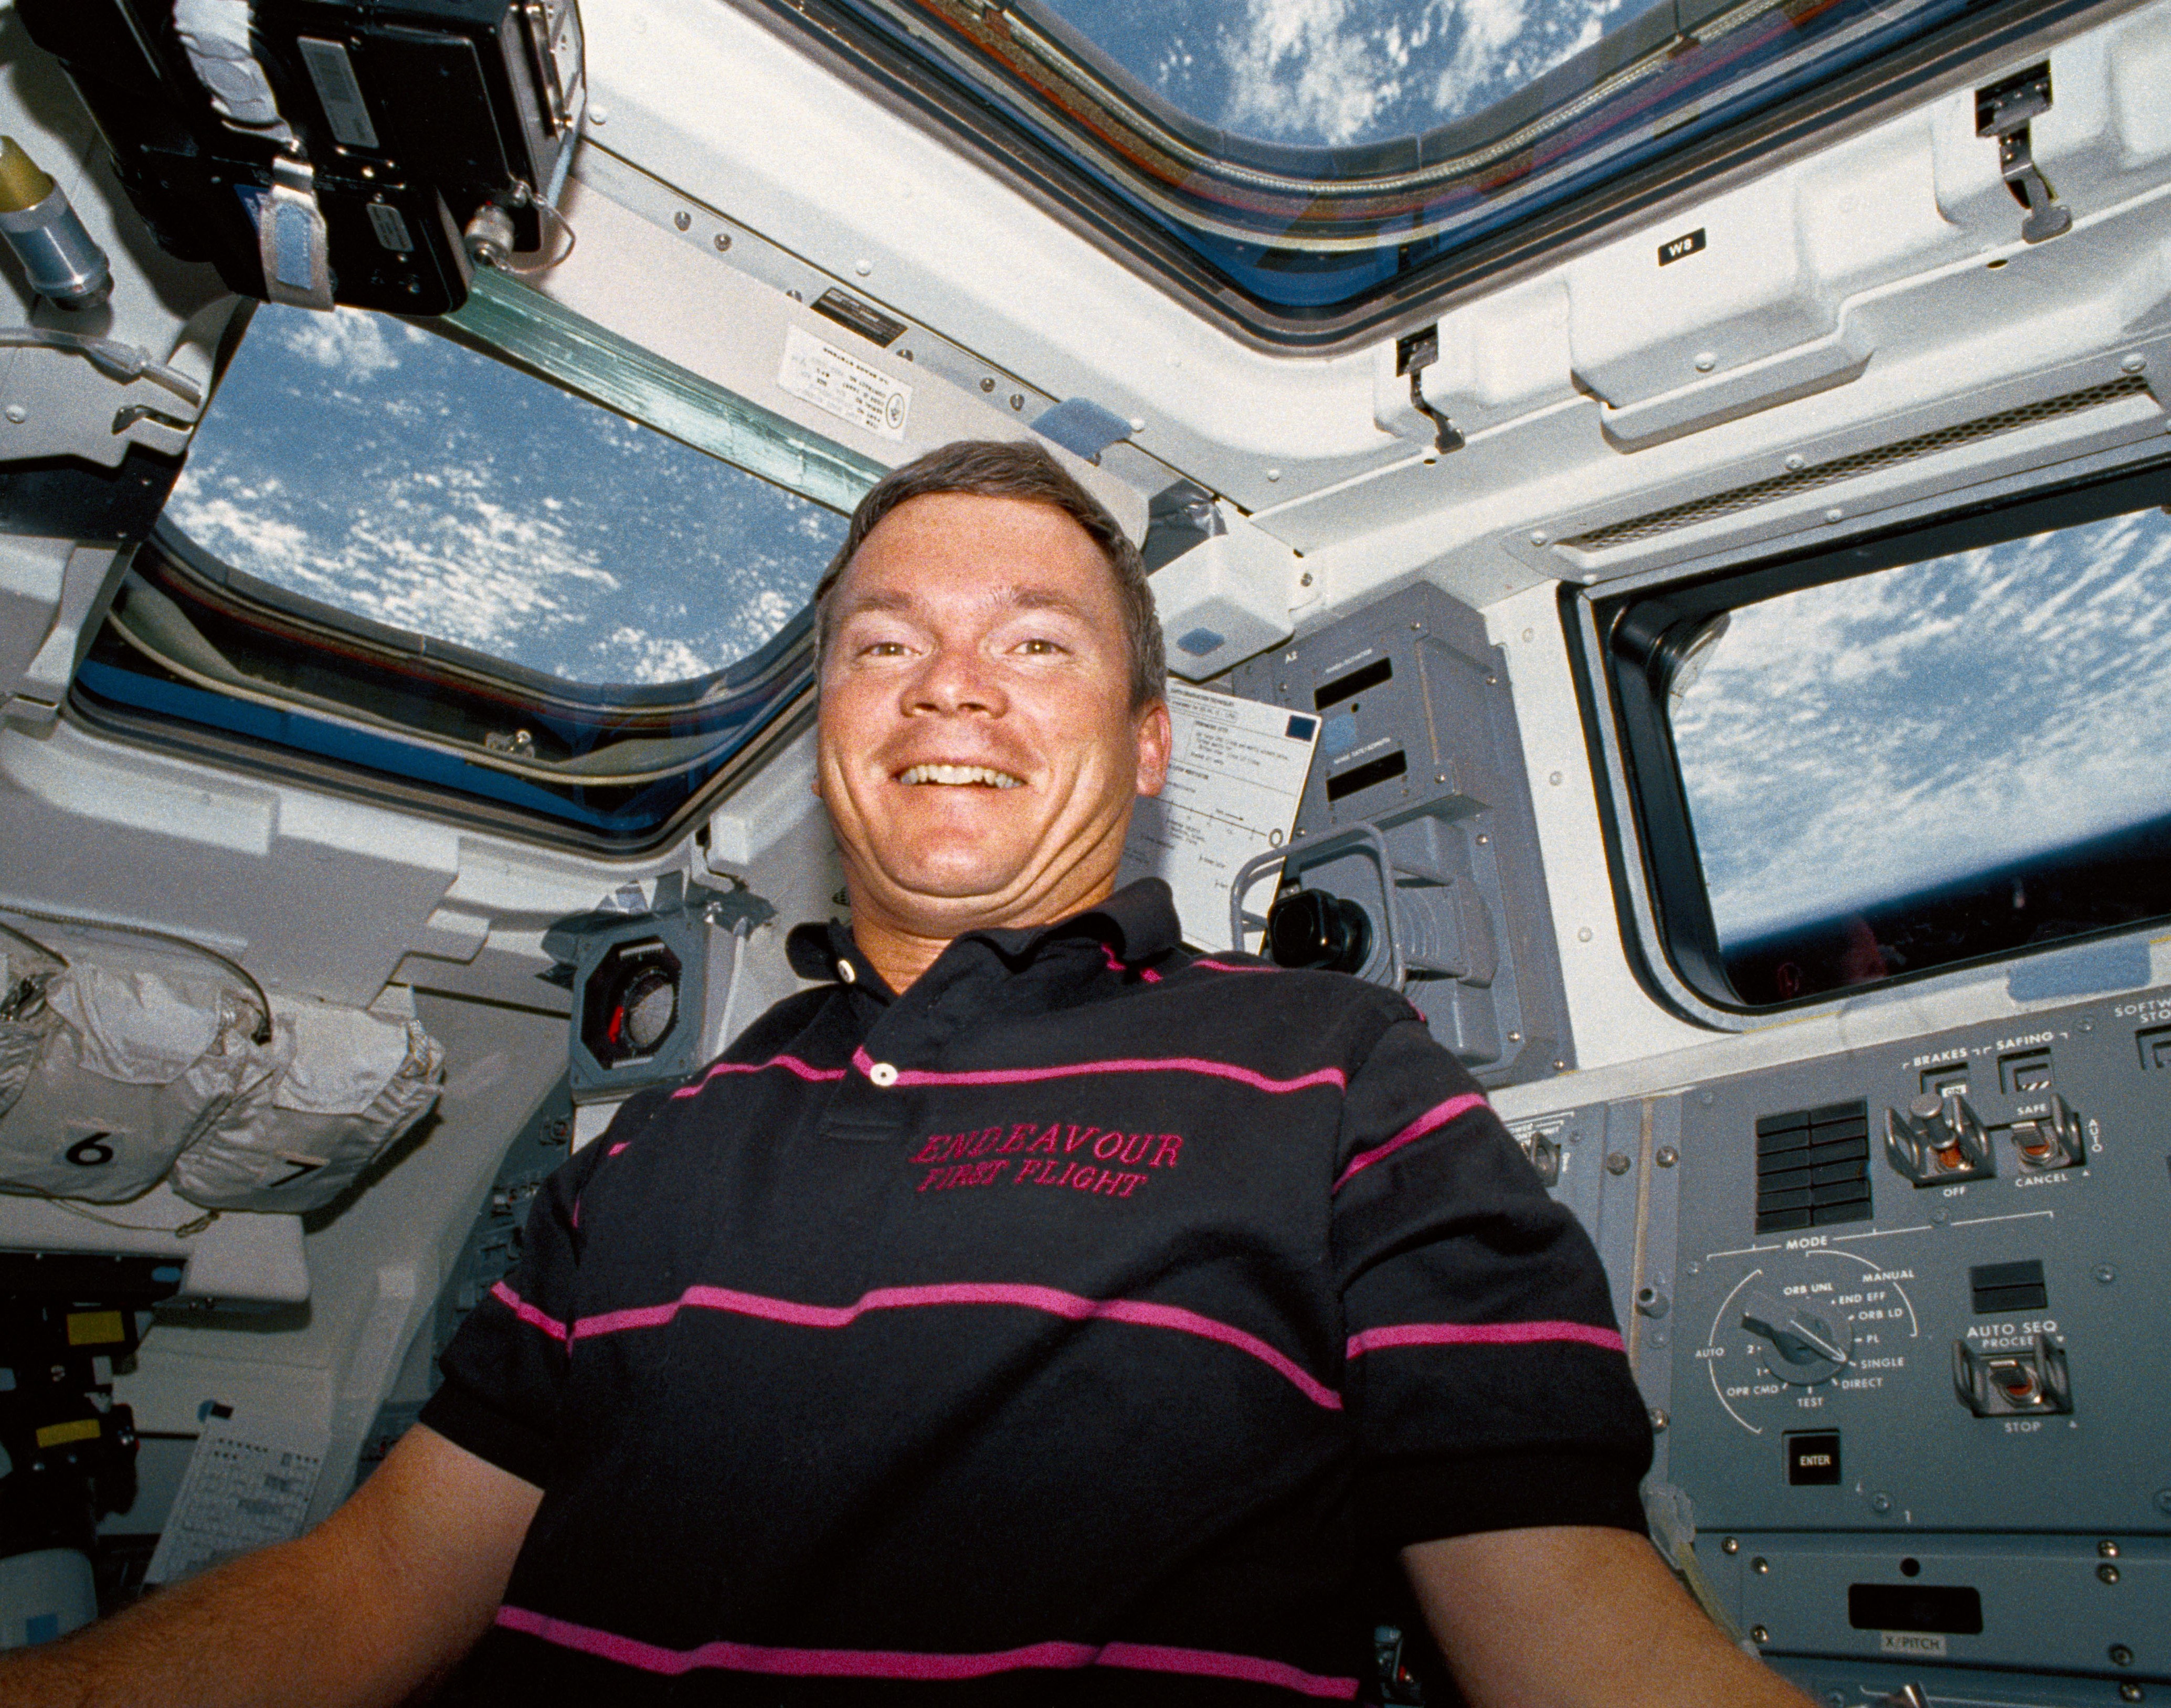 Melnick on the flight deck of Endeavour